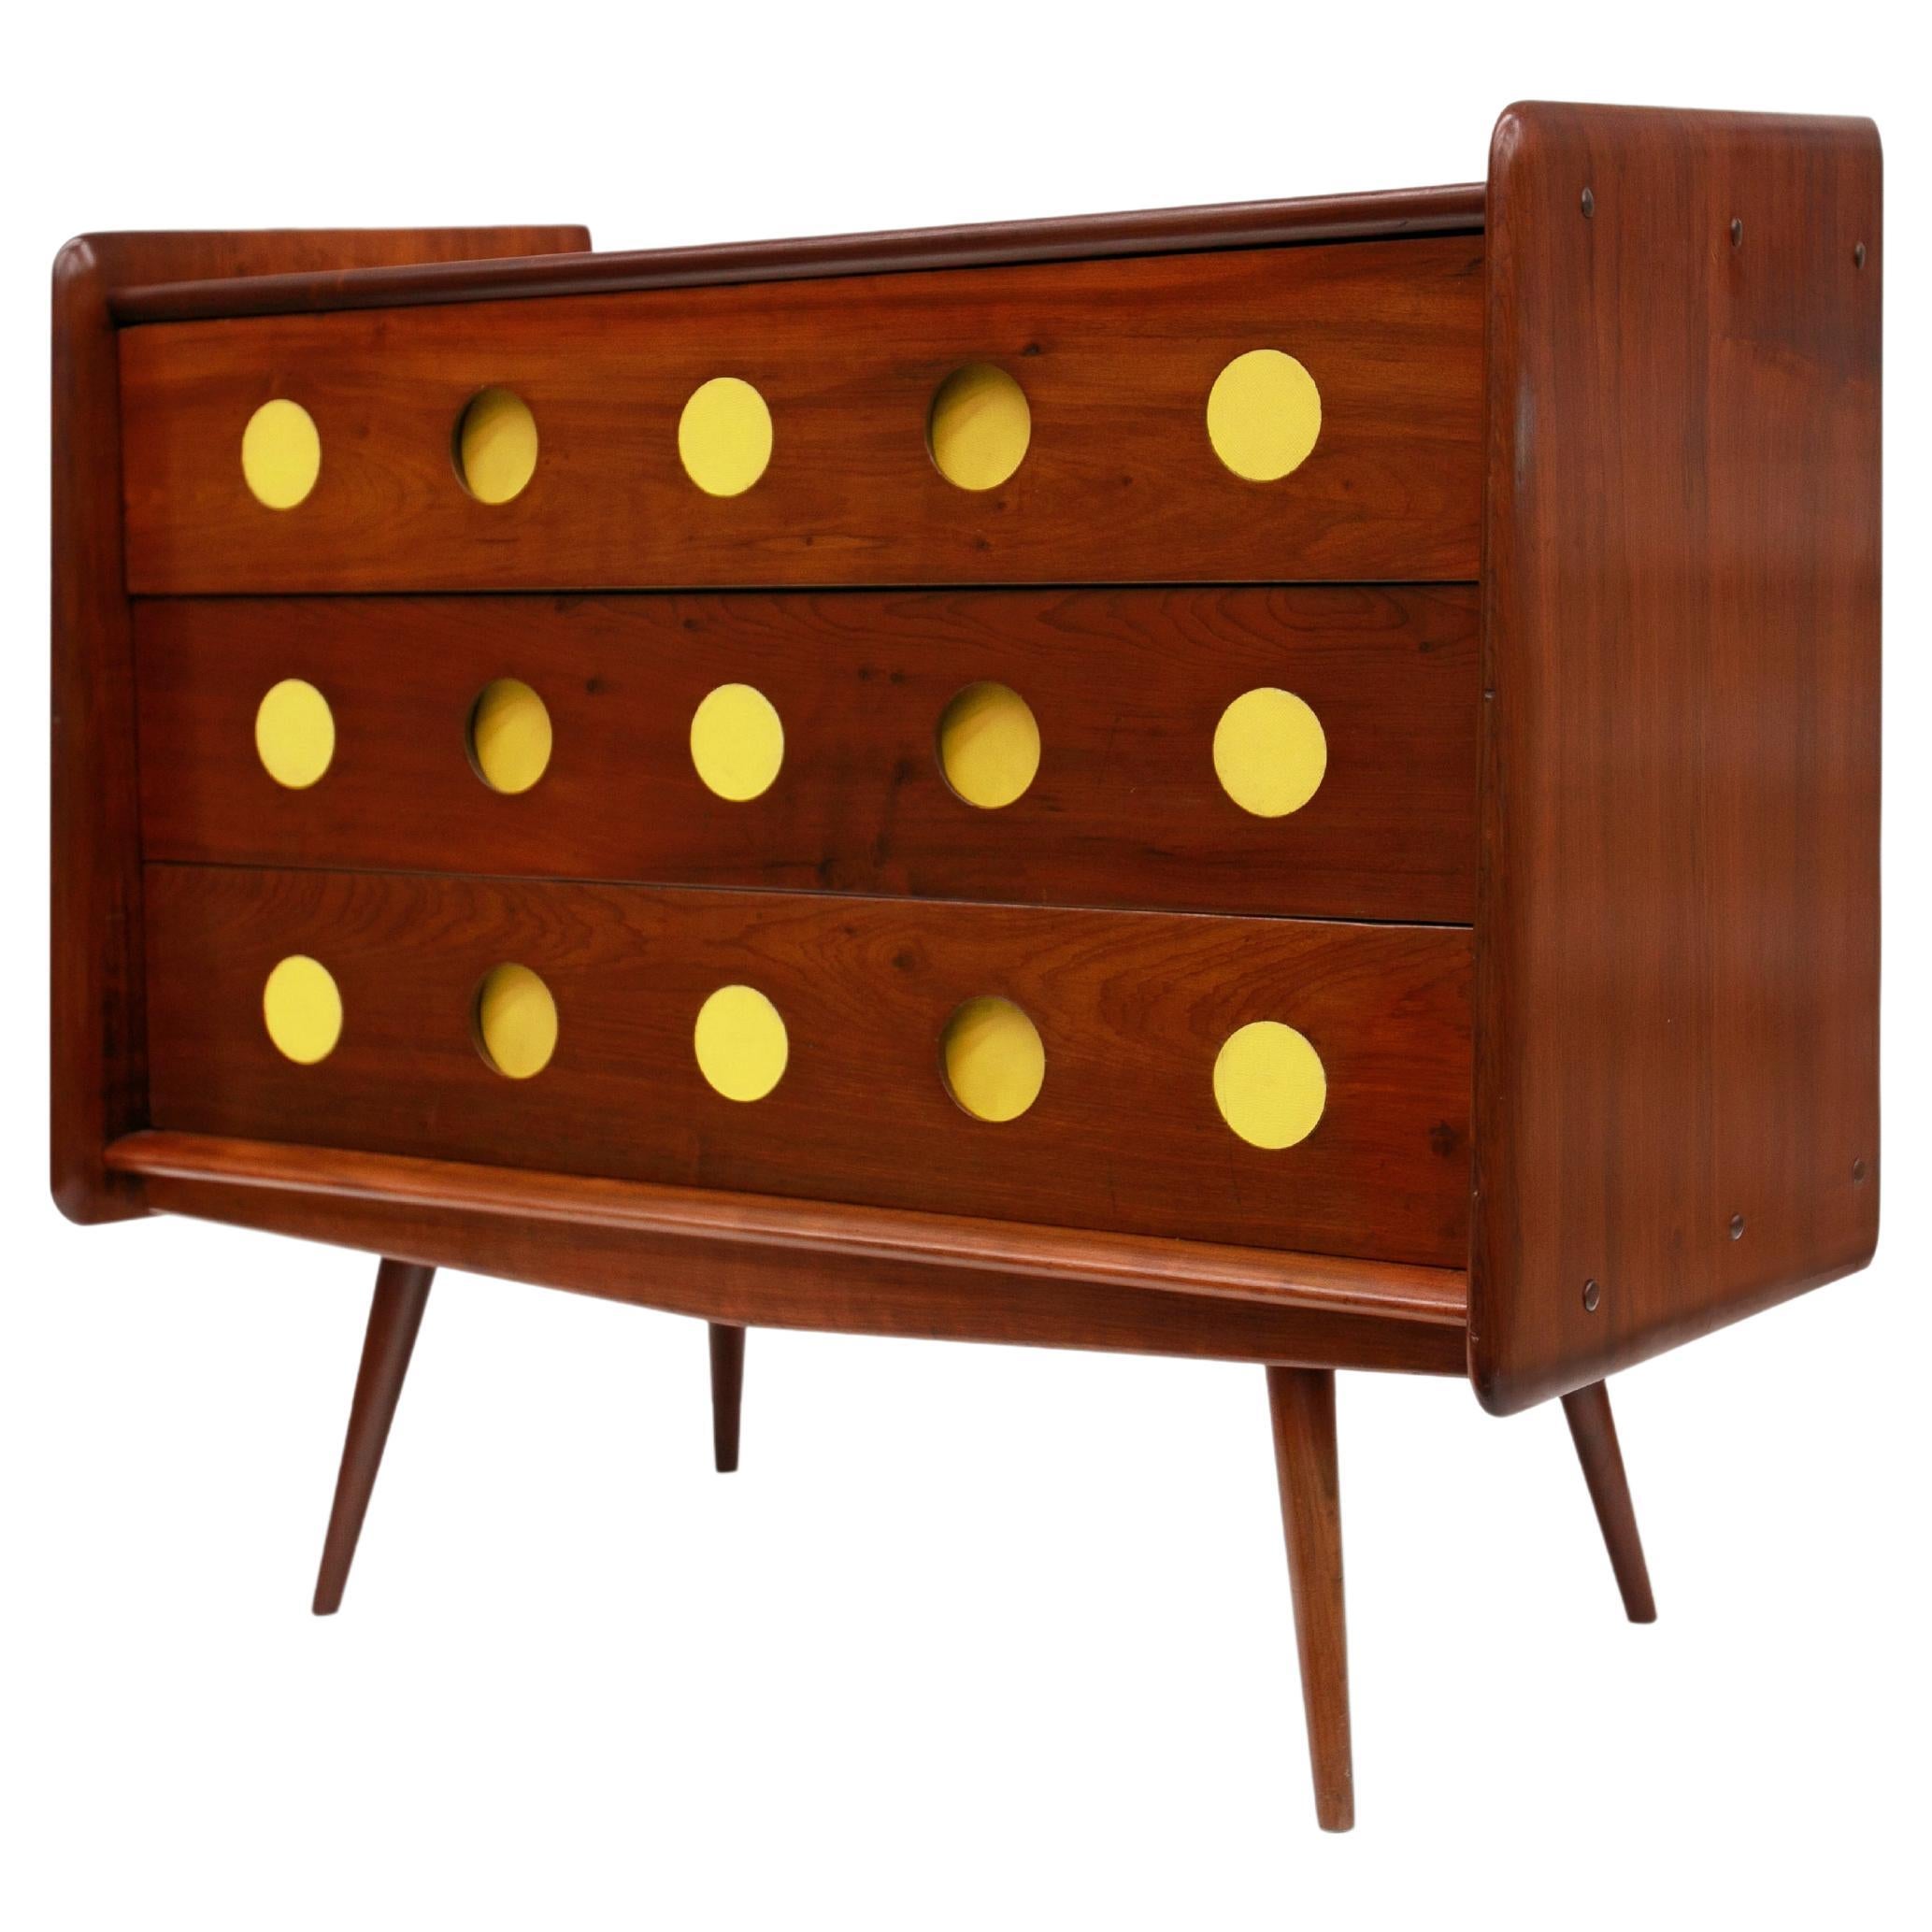 Brazilian Modern Chest of Drawers in Hardwood by Moveis Cimo, 1950s, Brazil